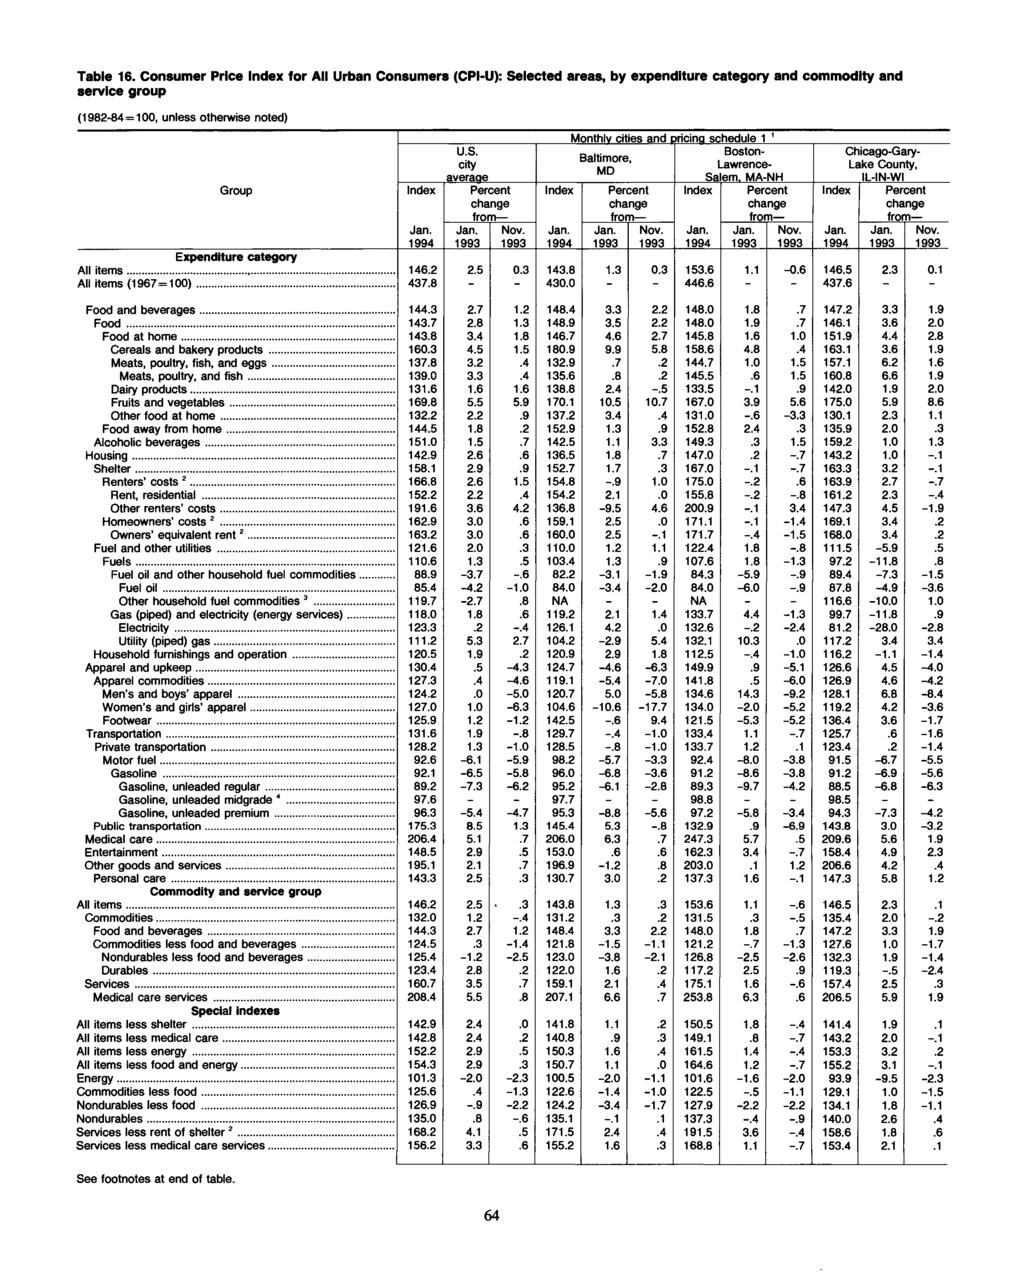 Table 16. Consumer Price for All Urban Consumers (CPI-U): Selected areas, by expenditure category and commodity and service group Group Expenditure category All items... All items (1967=100)... 146.